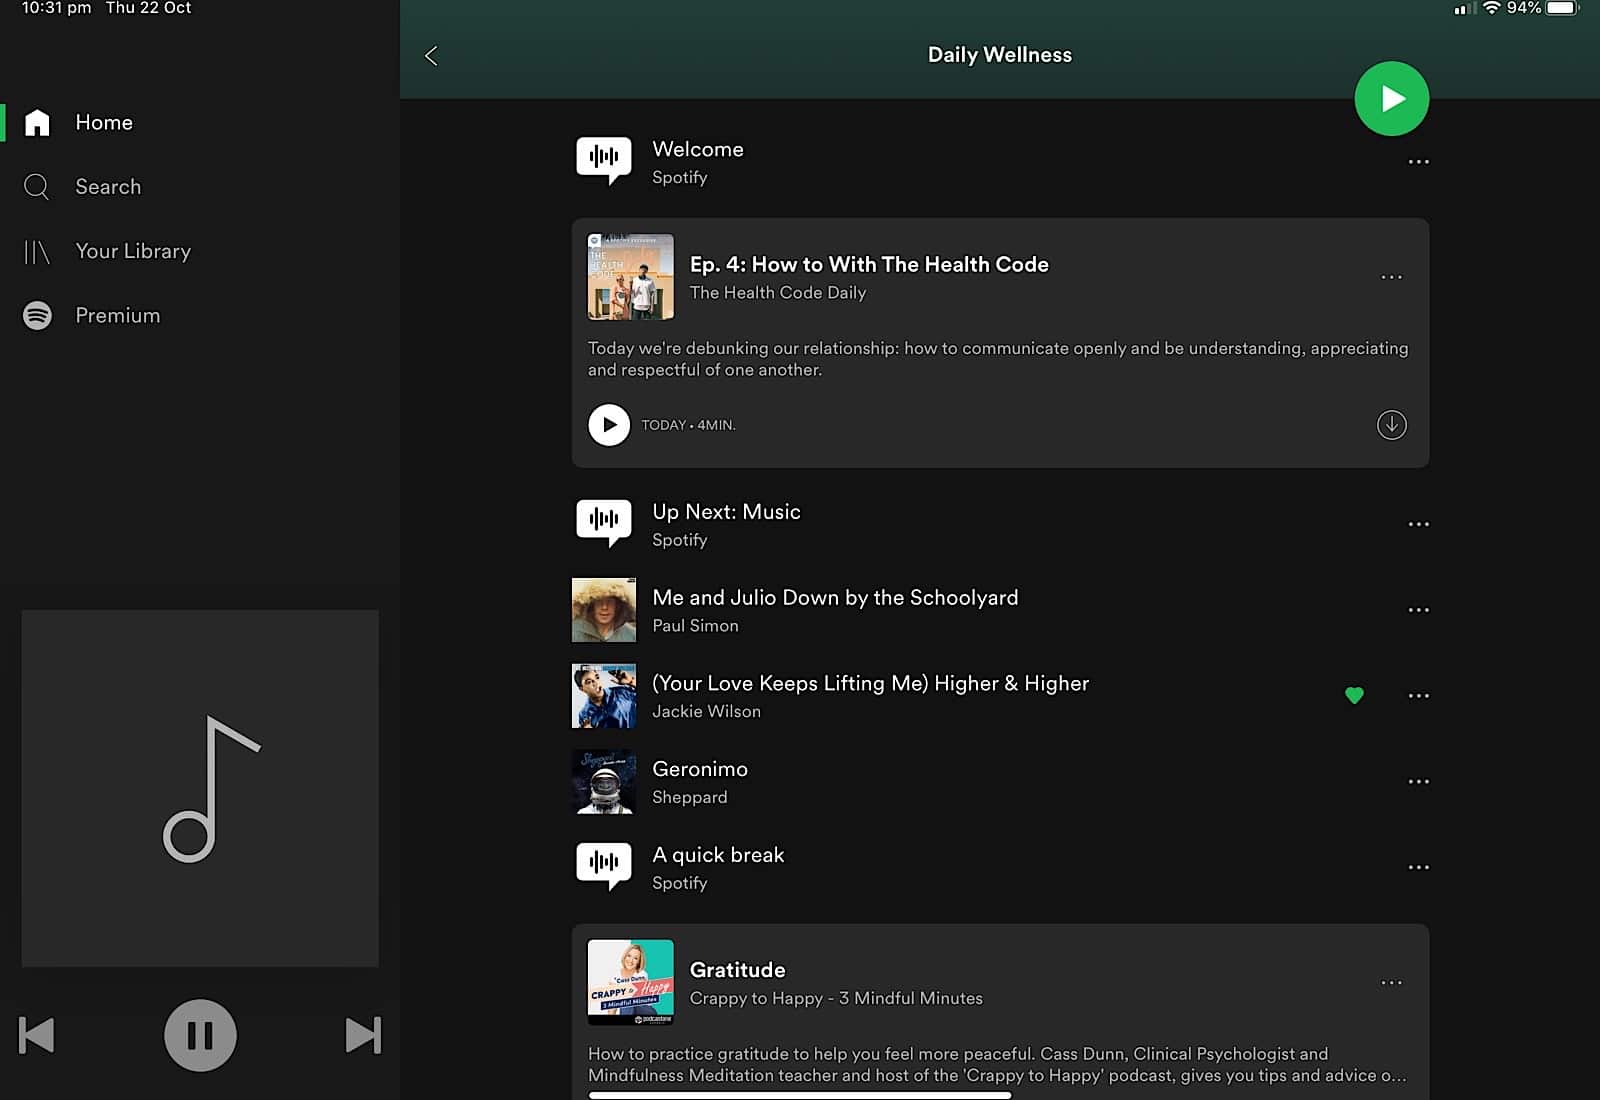 Spotify Daily Wellness feature available to Spotify customers on both Free and Premum.